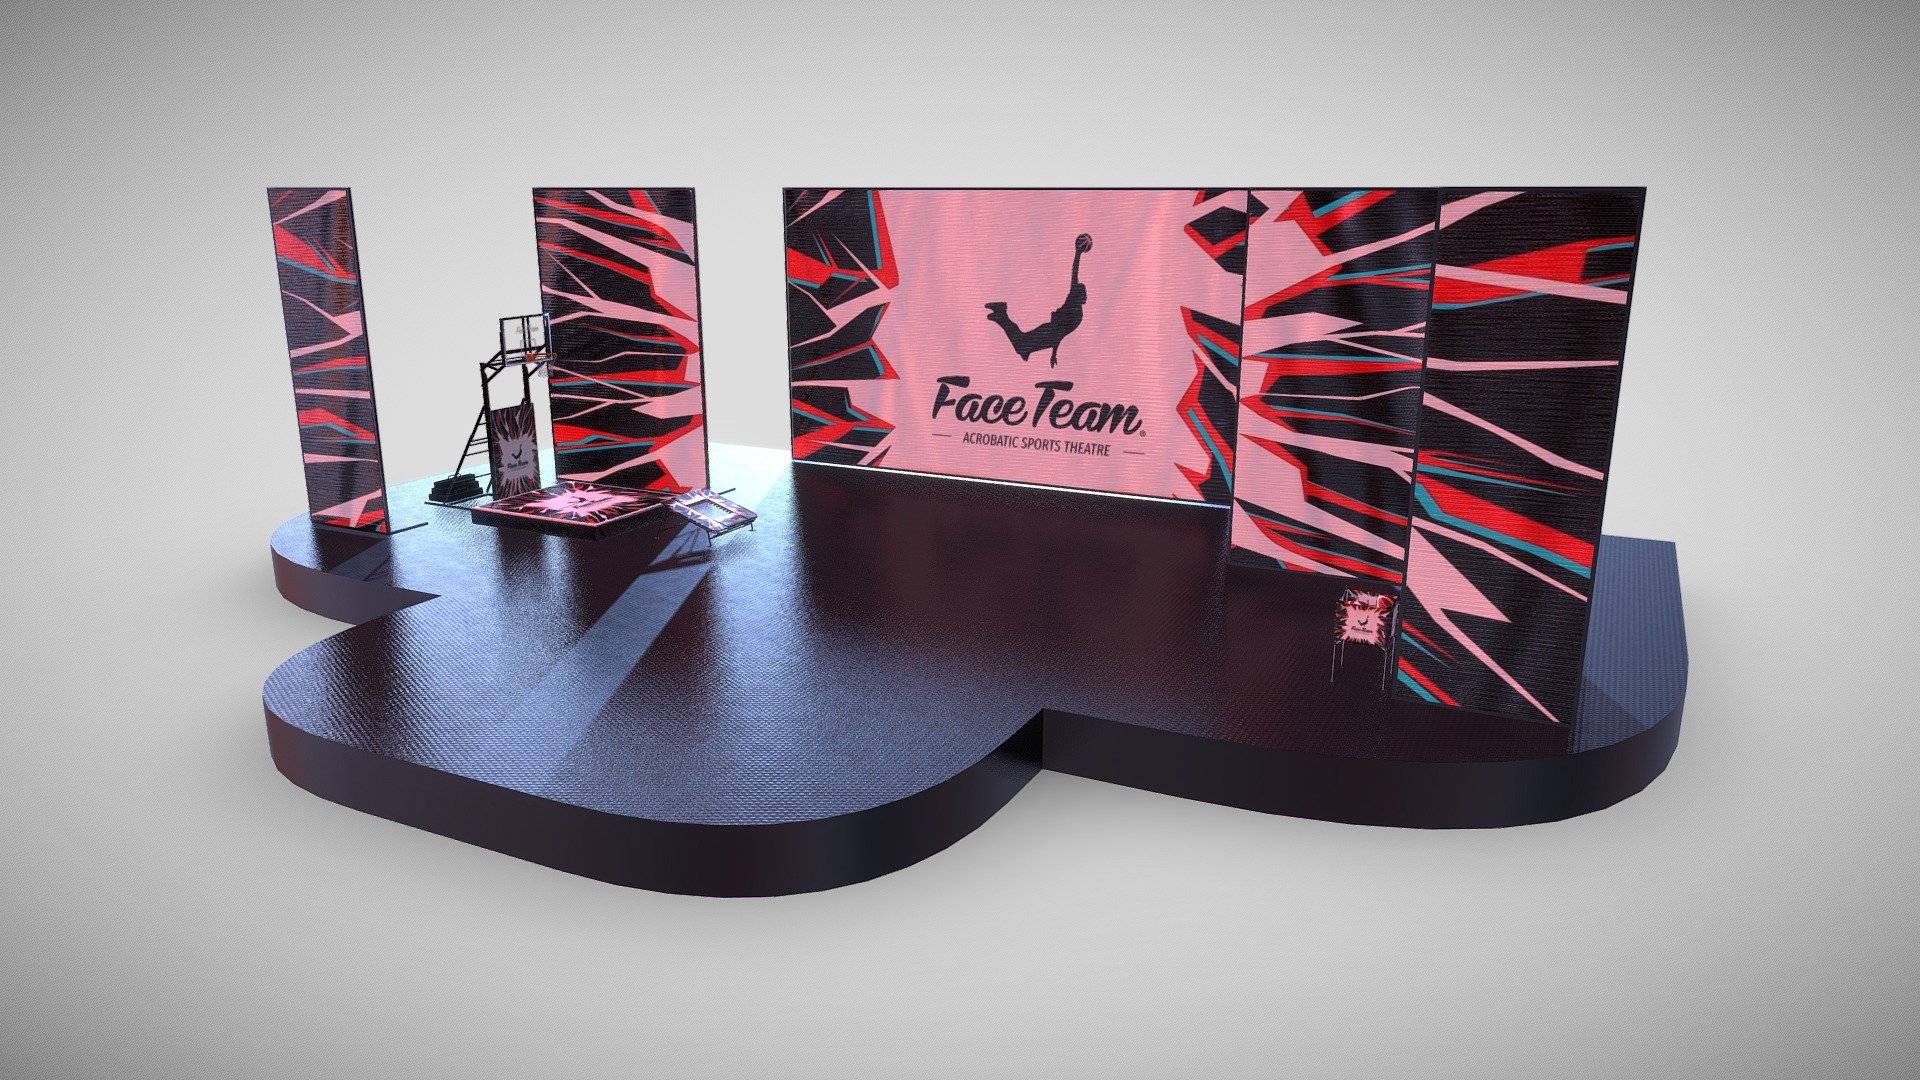 Copyright by: Face Team - Face Team Theater #1 - 3D model by Face Team (@faceteam) 3d model